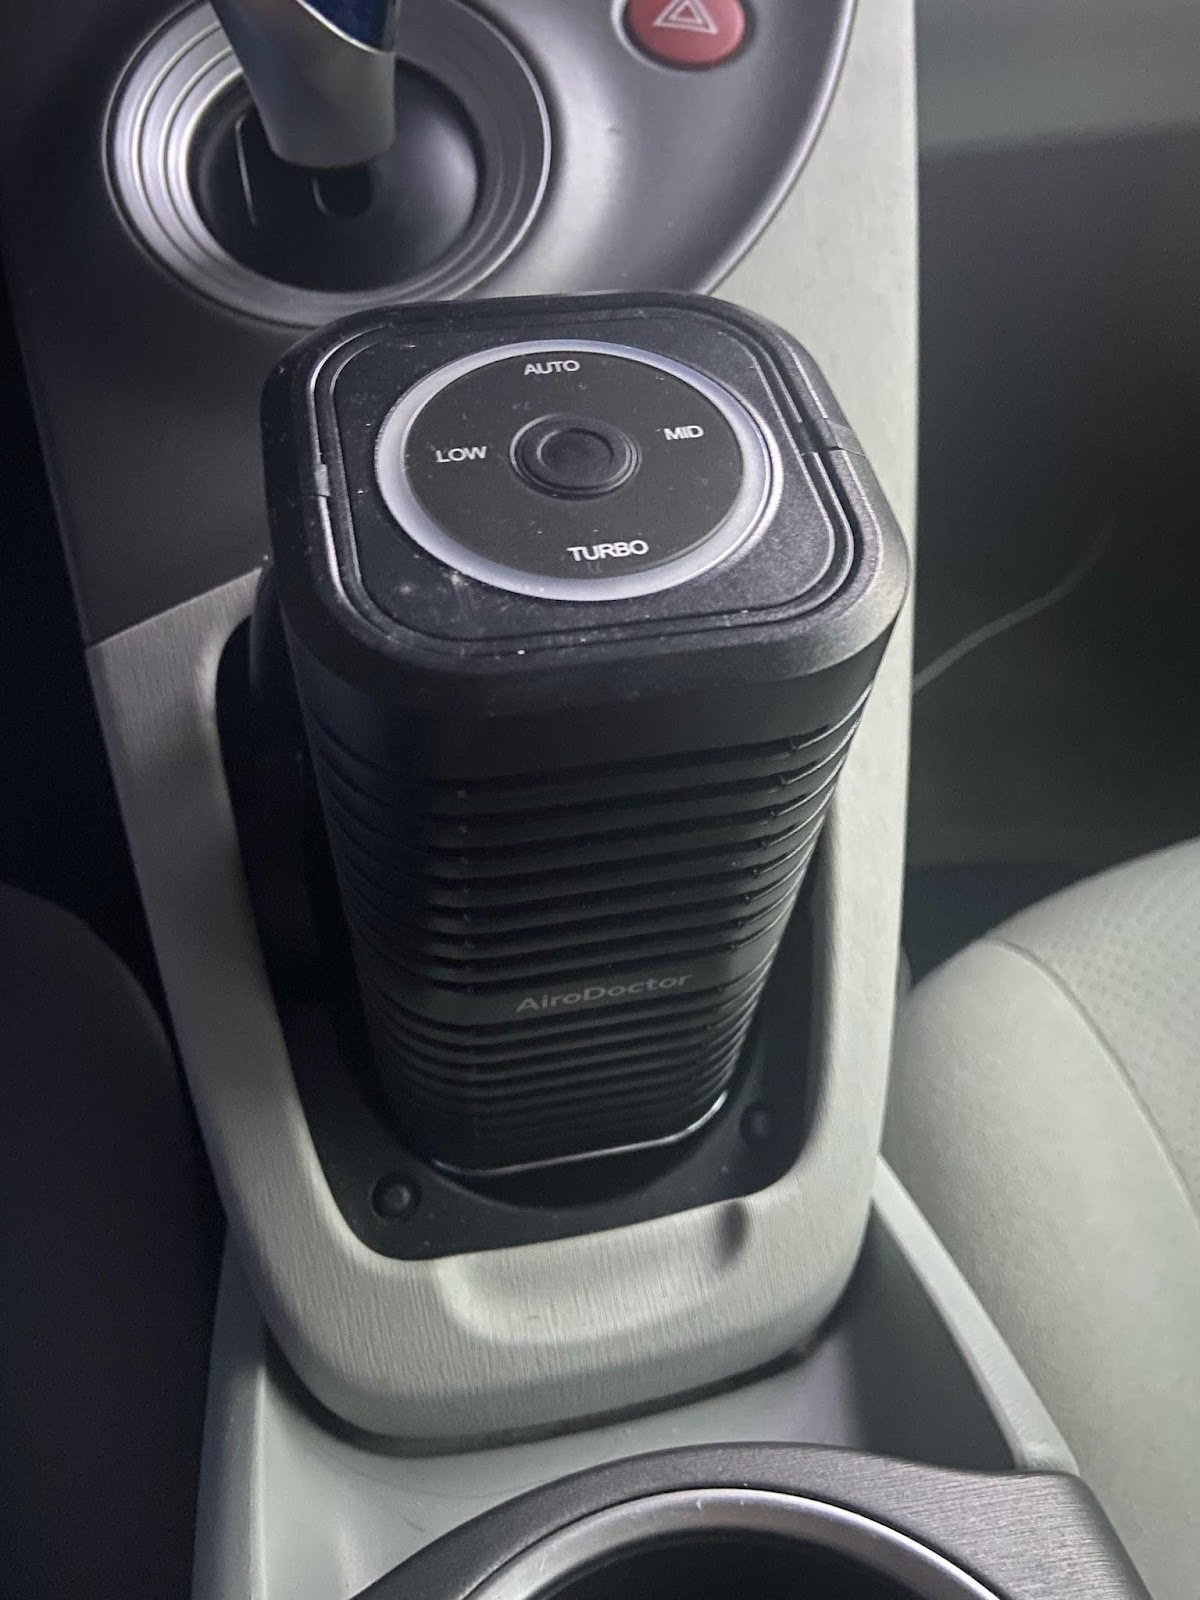 AiroDoctor Review: A Powerful Air Purifier For Drivers